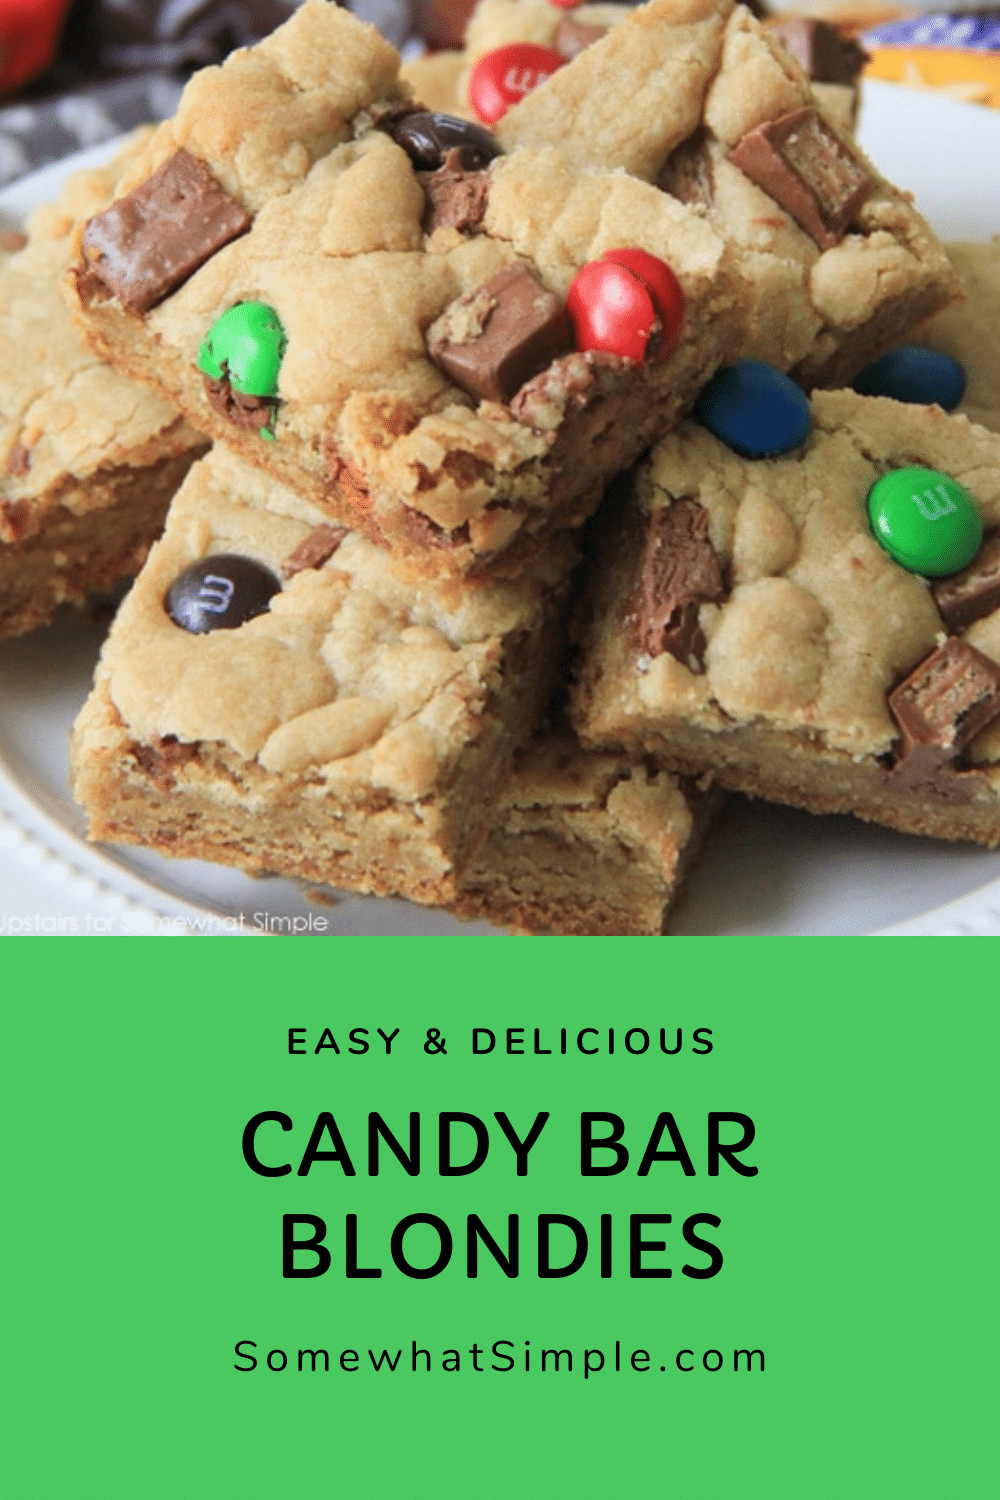 Candy Bar Blondies are a fun twist on a favorite dessert. The deliciously chewy brownie dough gets stuffed and topped with your favorite candies. It's a simple, sweet, and chocolatey treat! via @somewhatsimple